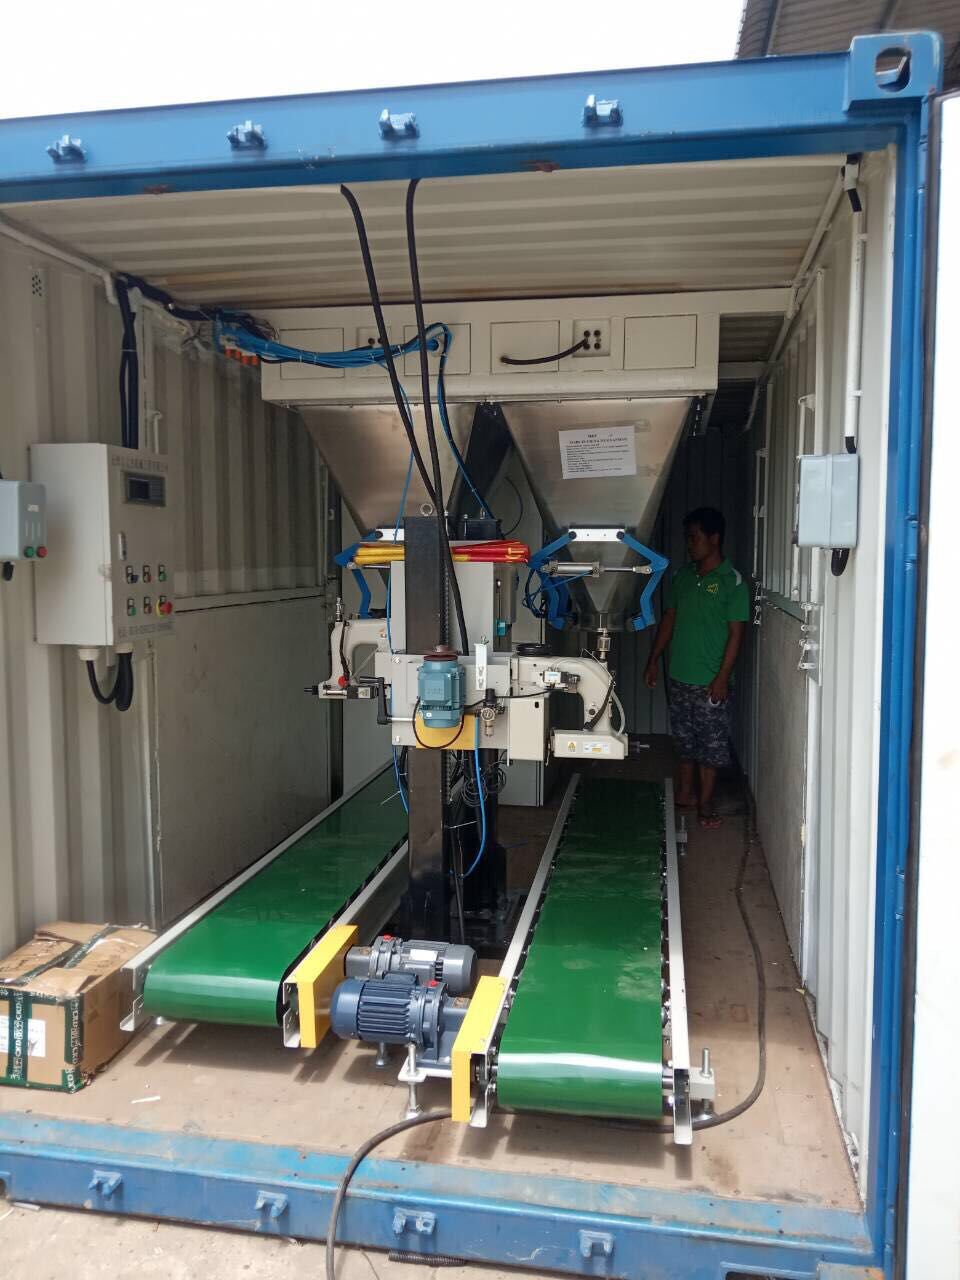 Containerised Bagging System, Mobile Bagging Unit, Mobile Containserized Bagging Unit, Wuxi HY Machinery Co., Ltd